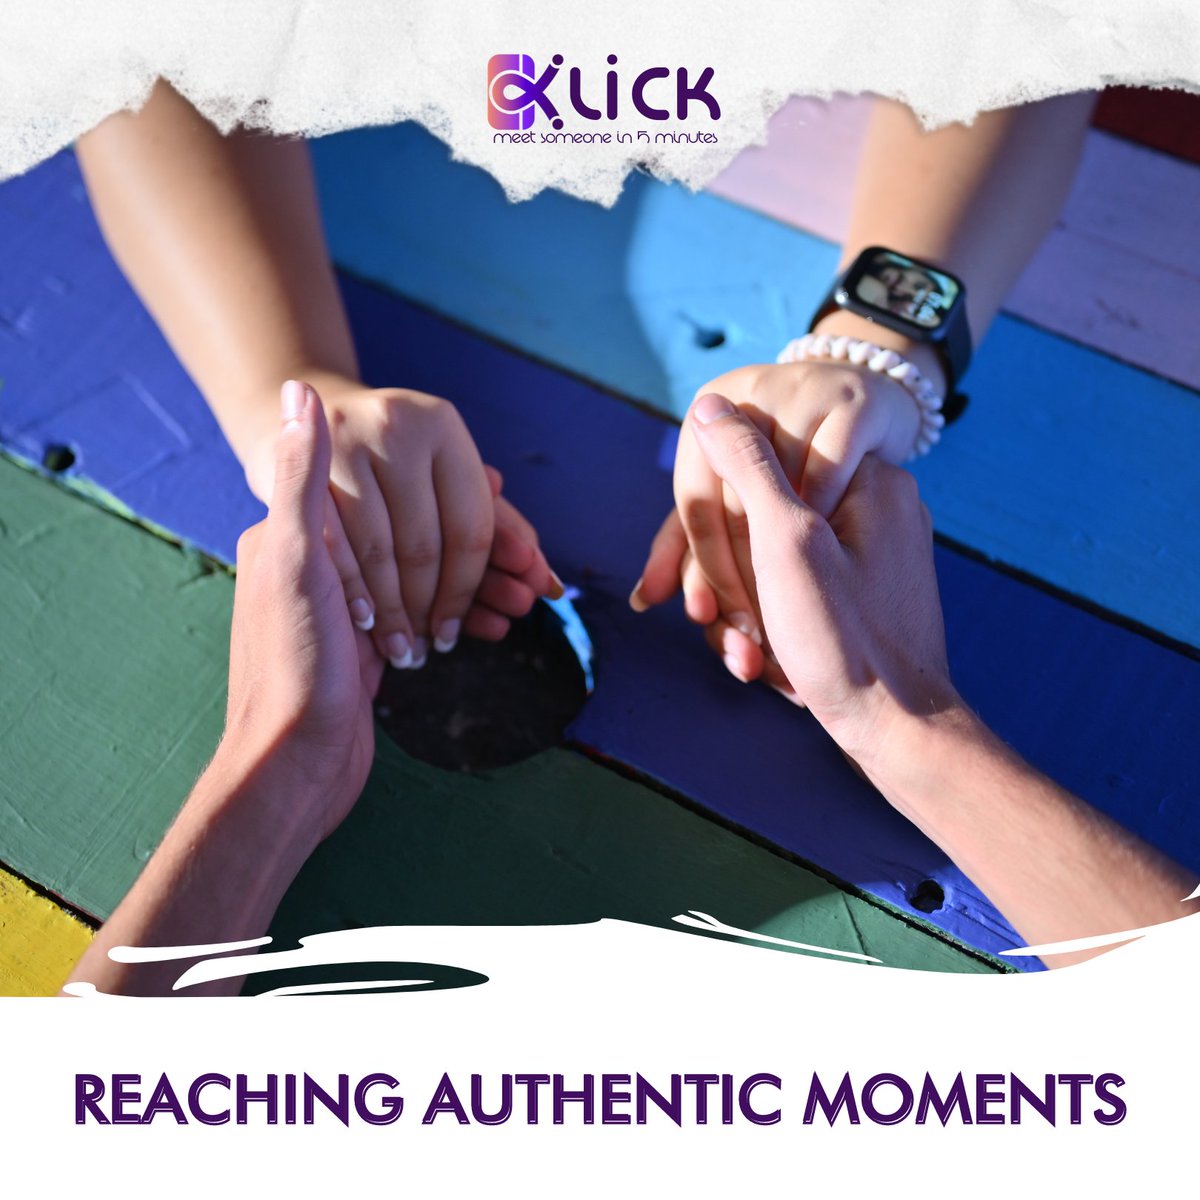 Discover the real deal with Klick! Authentic connections await. ✨ #Klick #magicalmoments